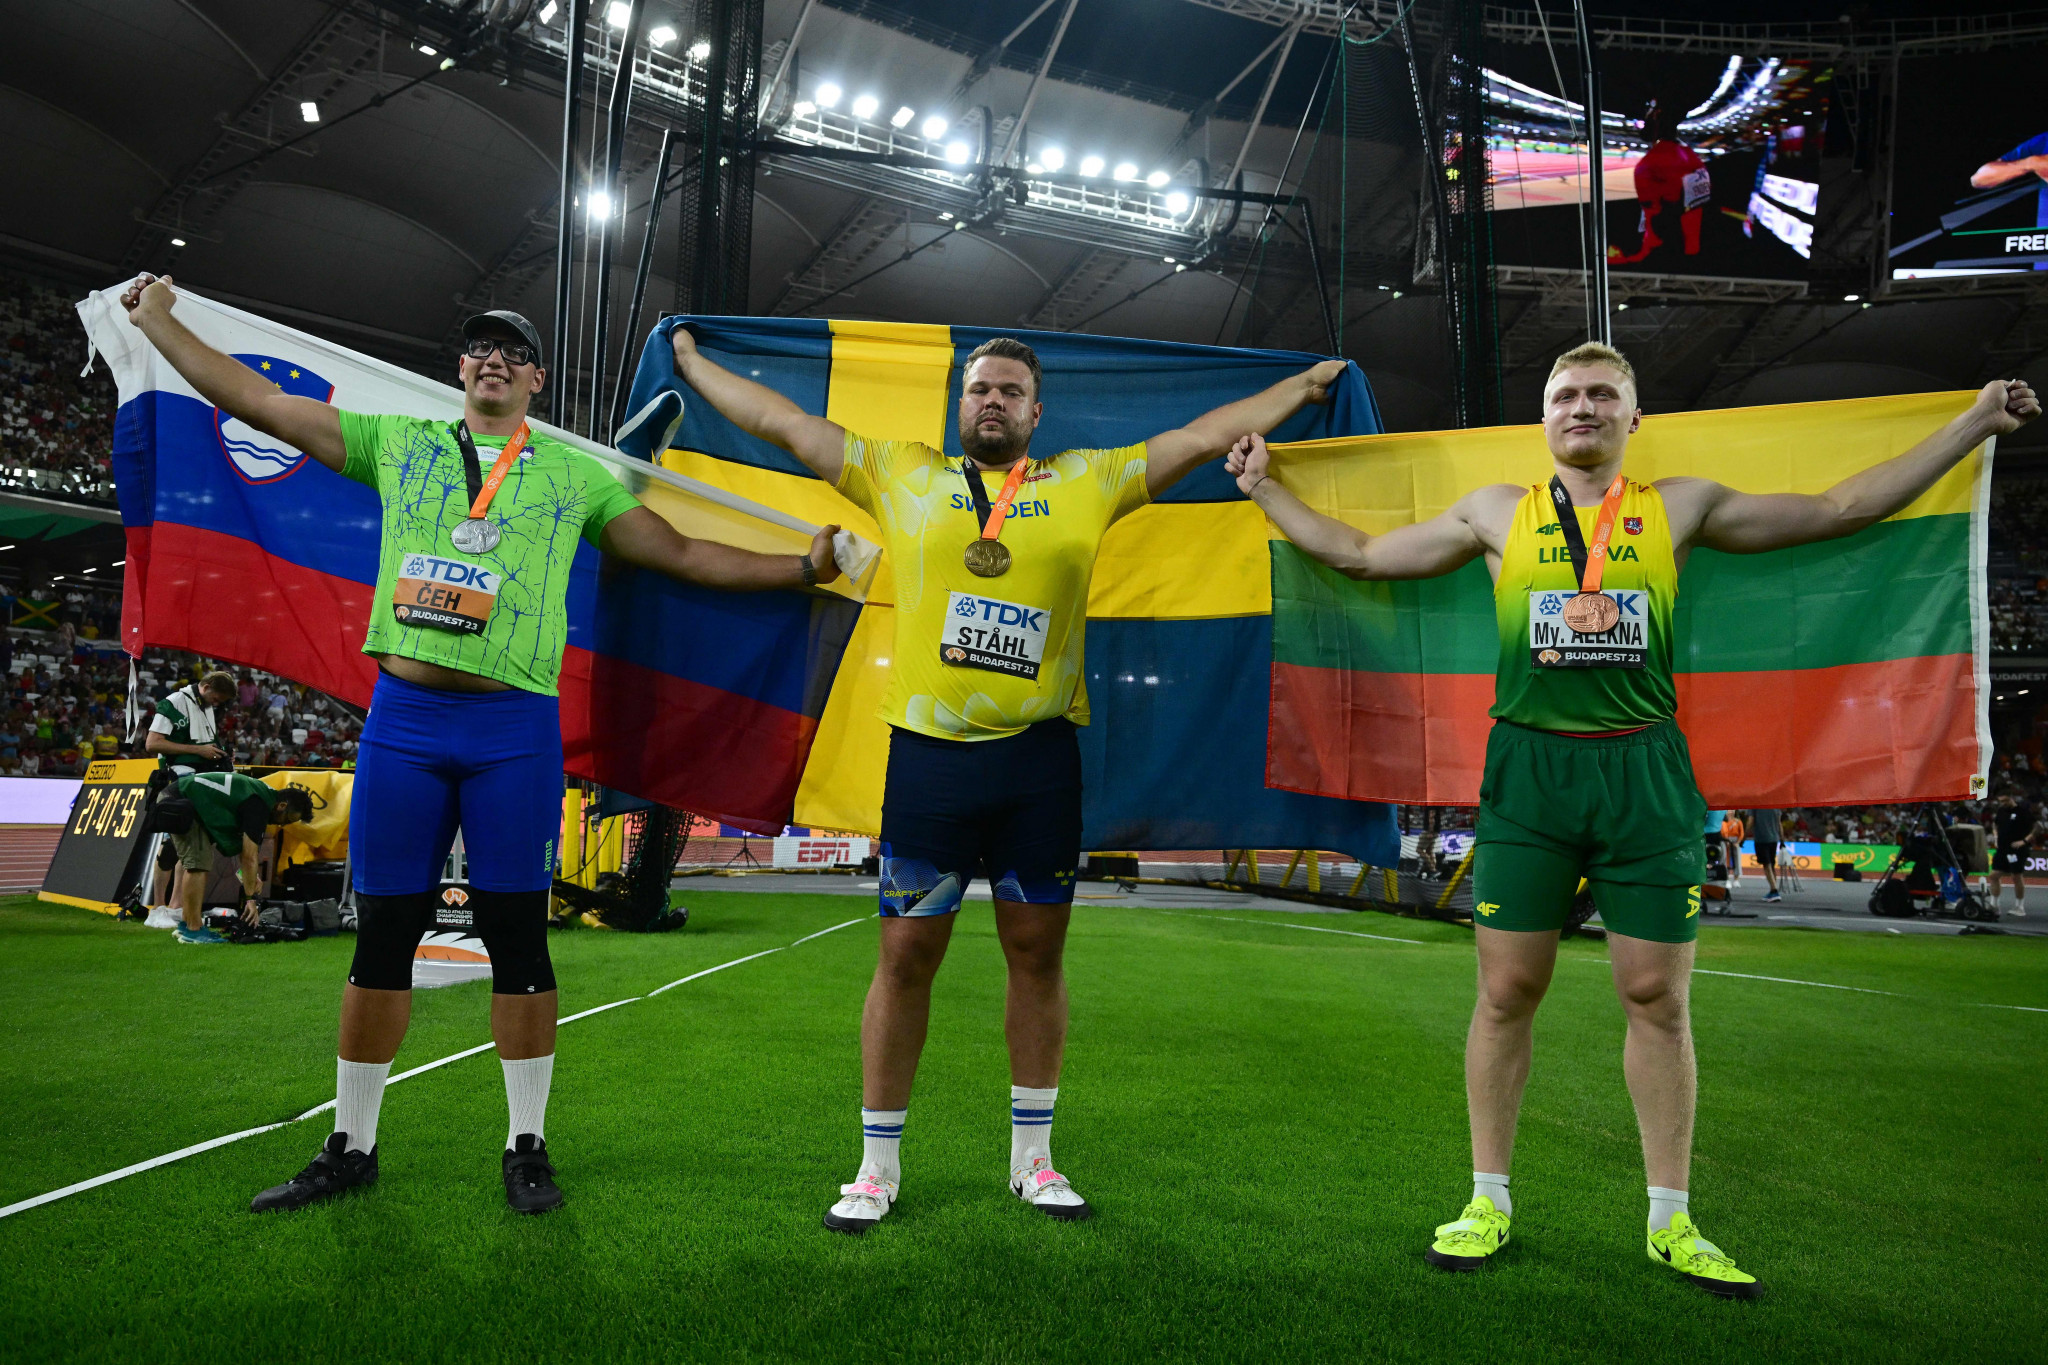 Sweden's Daniel Ståhl, centre, emerged victorious from a gold medal battle with Slovenia's Kristjan Čeh, left, in the men's discus throw final ©Getty Images